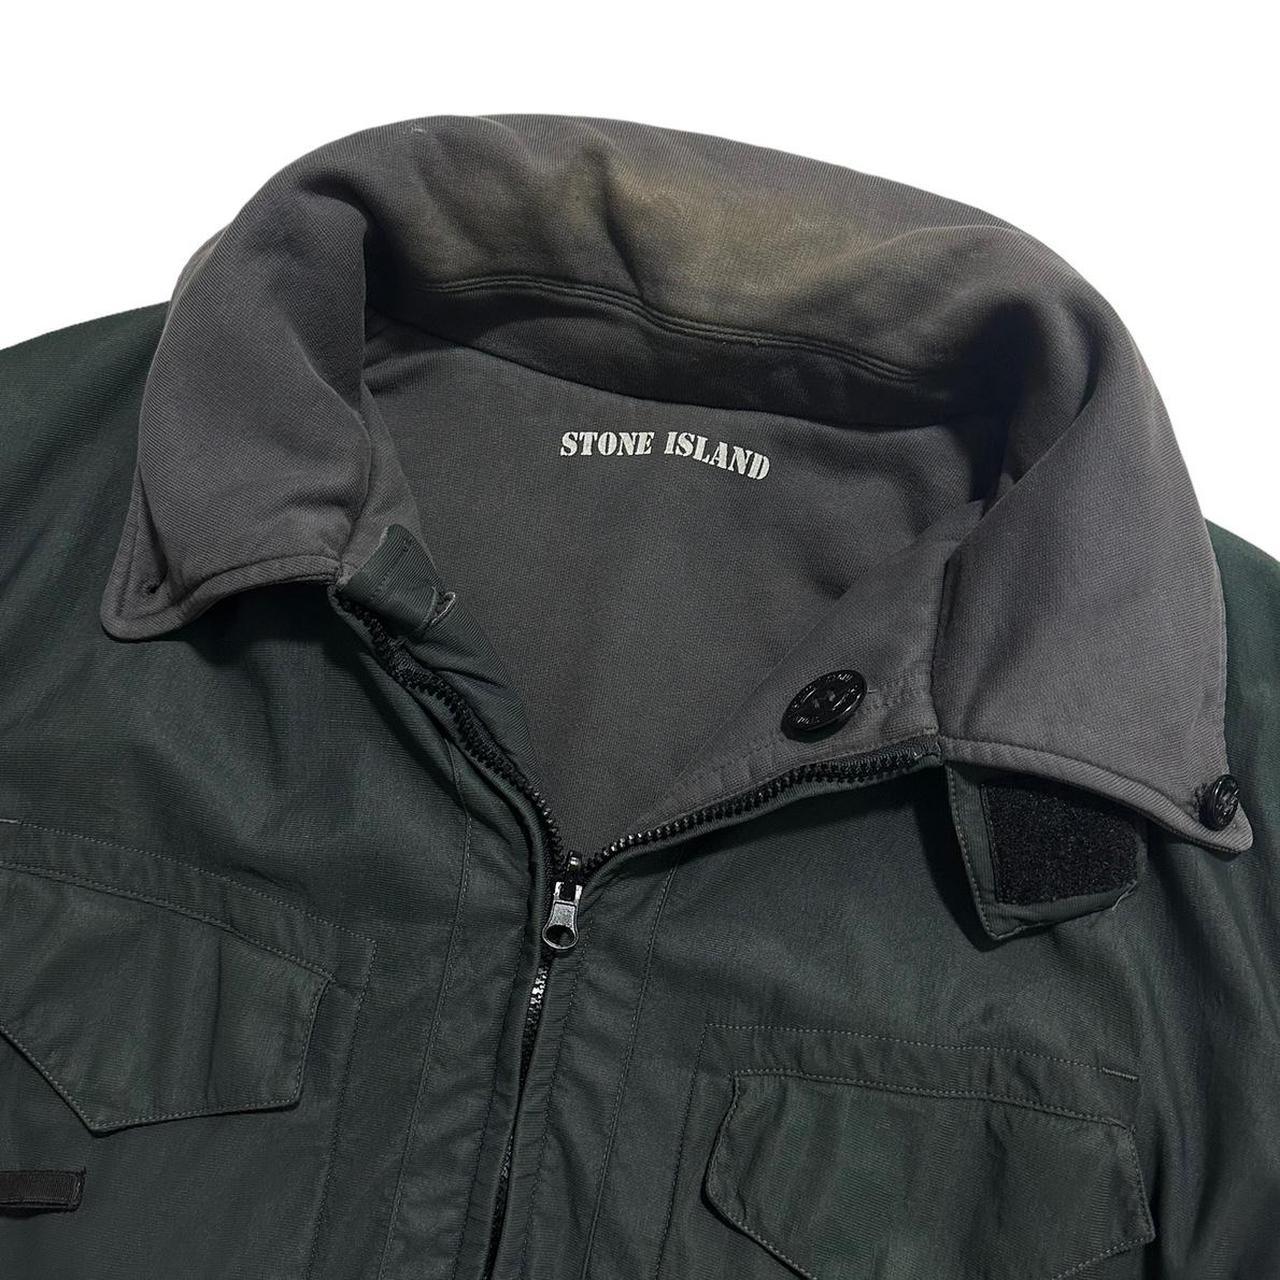 Stone Island Heavy Revesible Jacket - Known Source